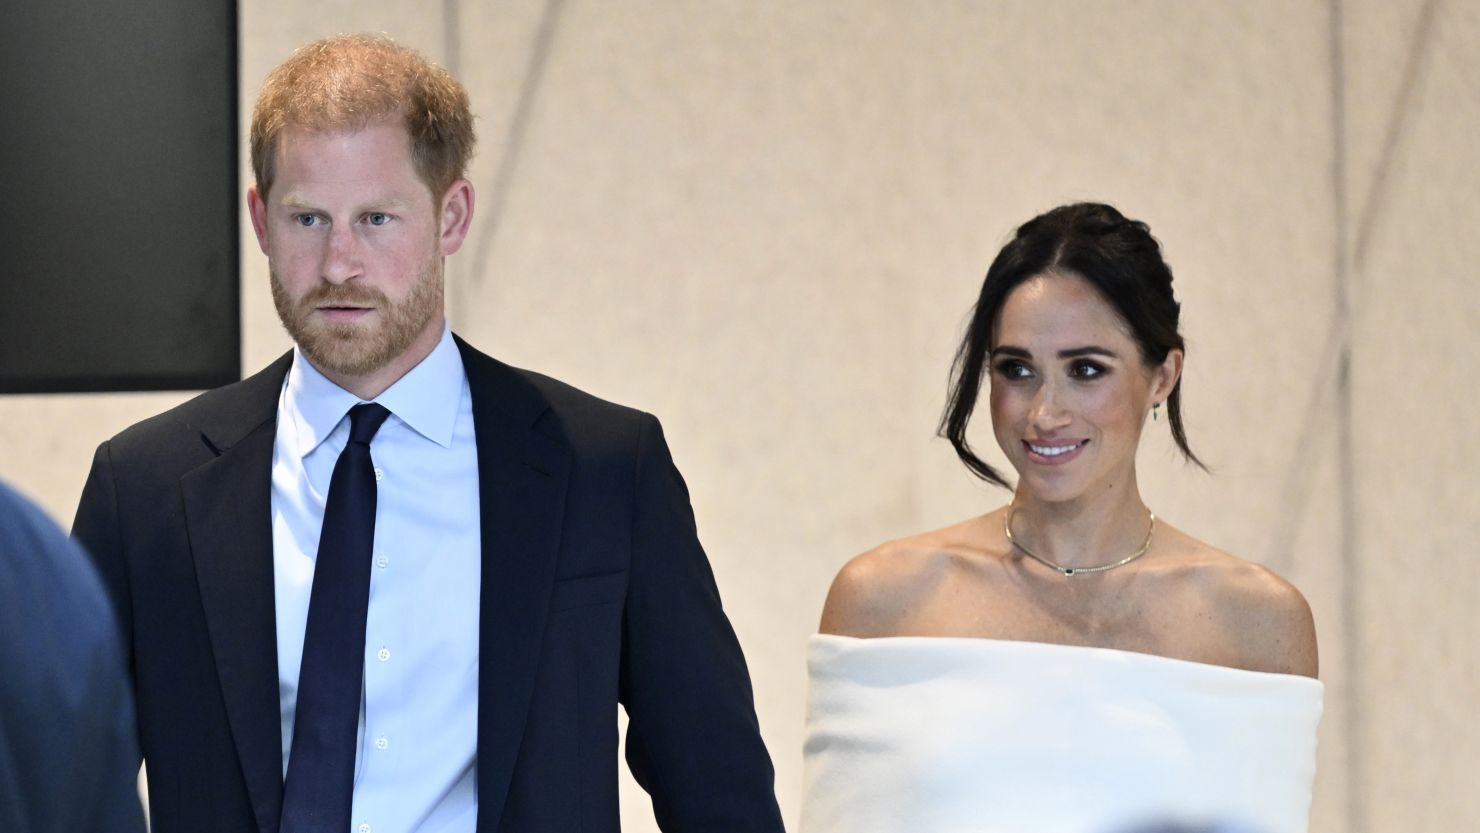 Prince Harry and Meghan, Duchess of Sussex, participate in The Archewell Foundation Parents' Summit "Mental Wellness in the Digital Age" as part of Project Healthy Minds' World Mental Health Day Festival on Tuesday, Oct. 10, 2023, in New York.